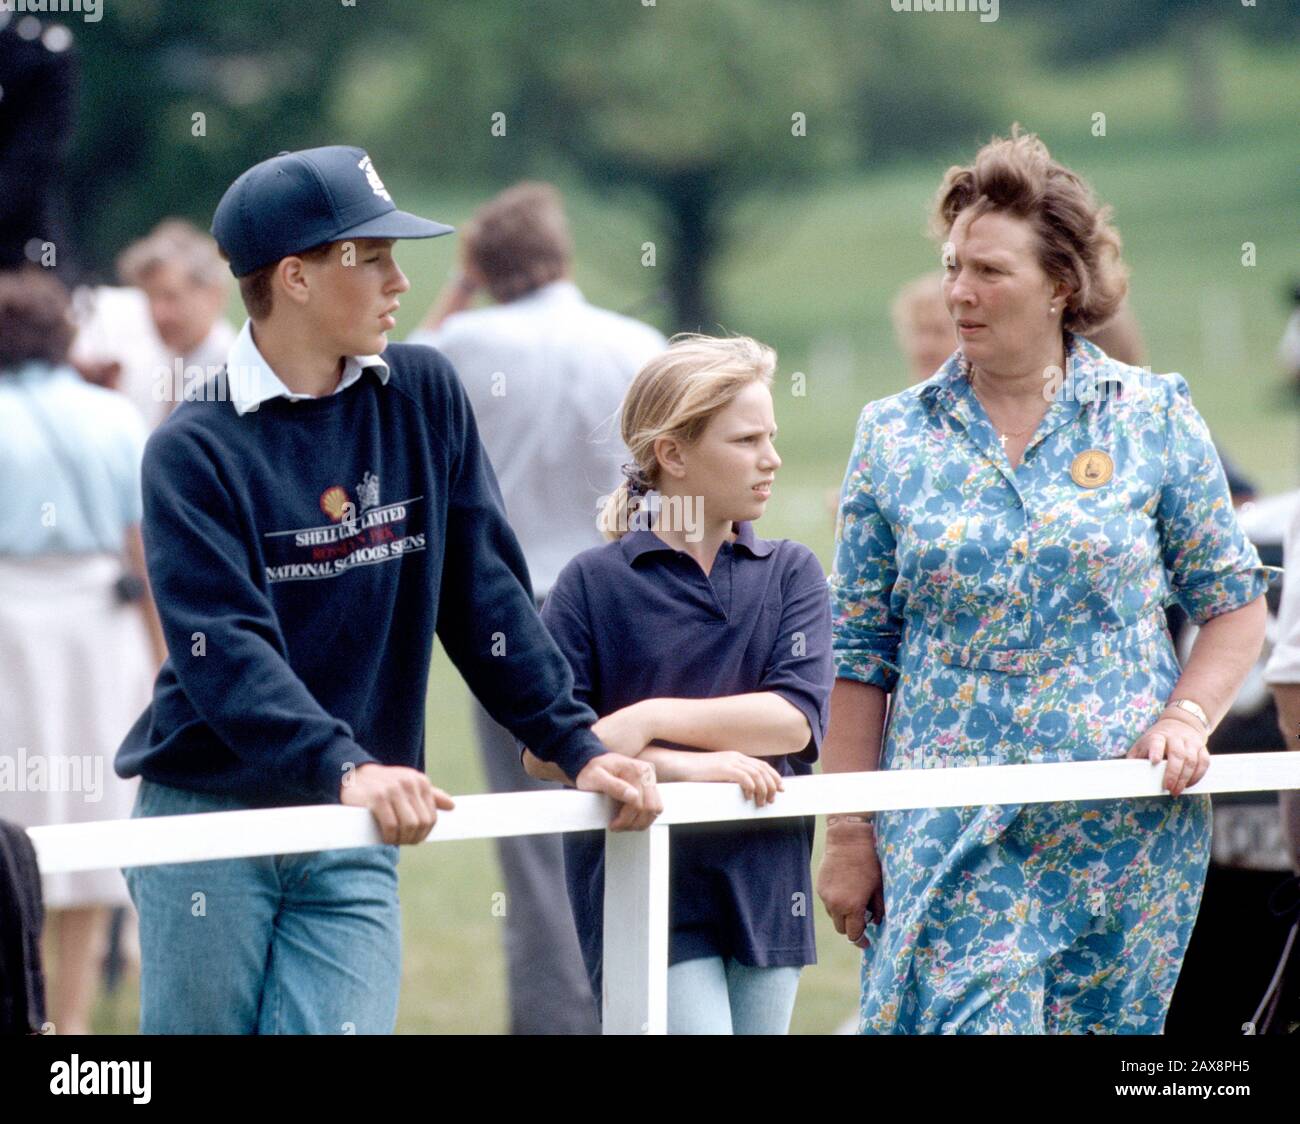 Peter Phillips, Zara Phillips and Davina Cannon (Press officer) at the Windsor Horse Trials, England 1989. Stock Photo